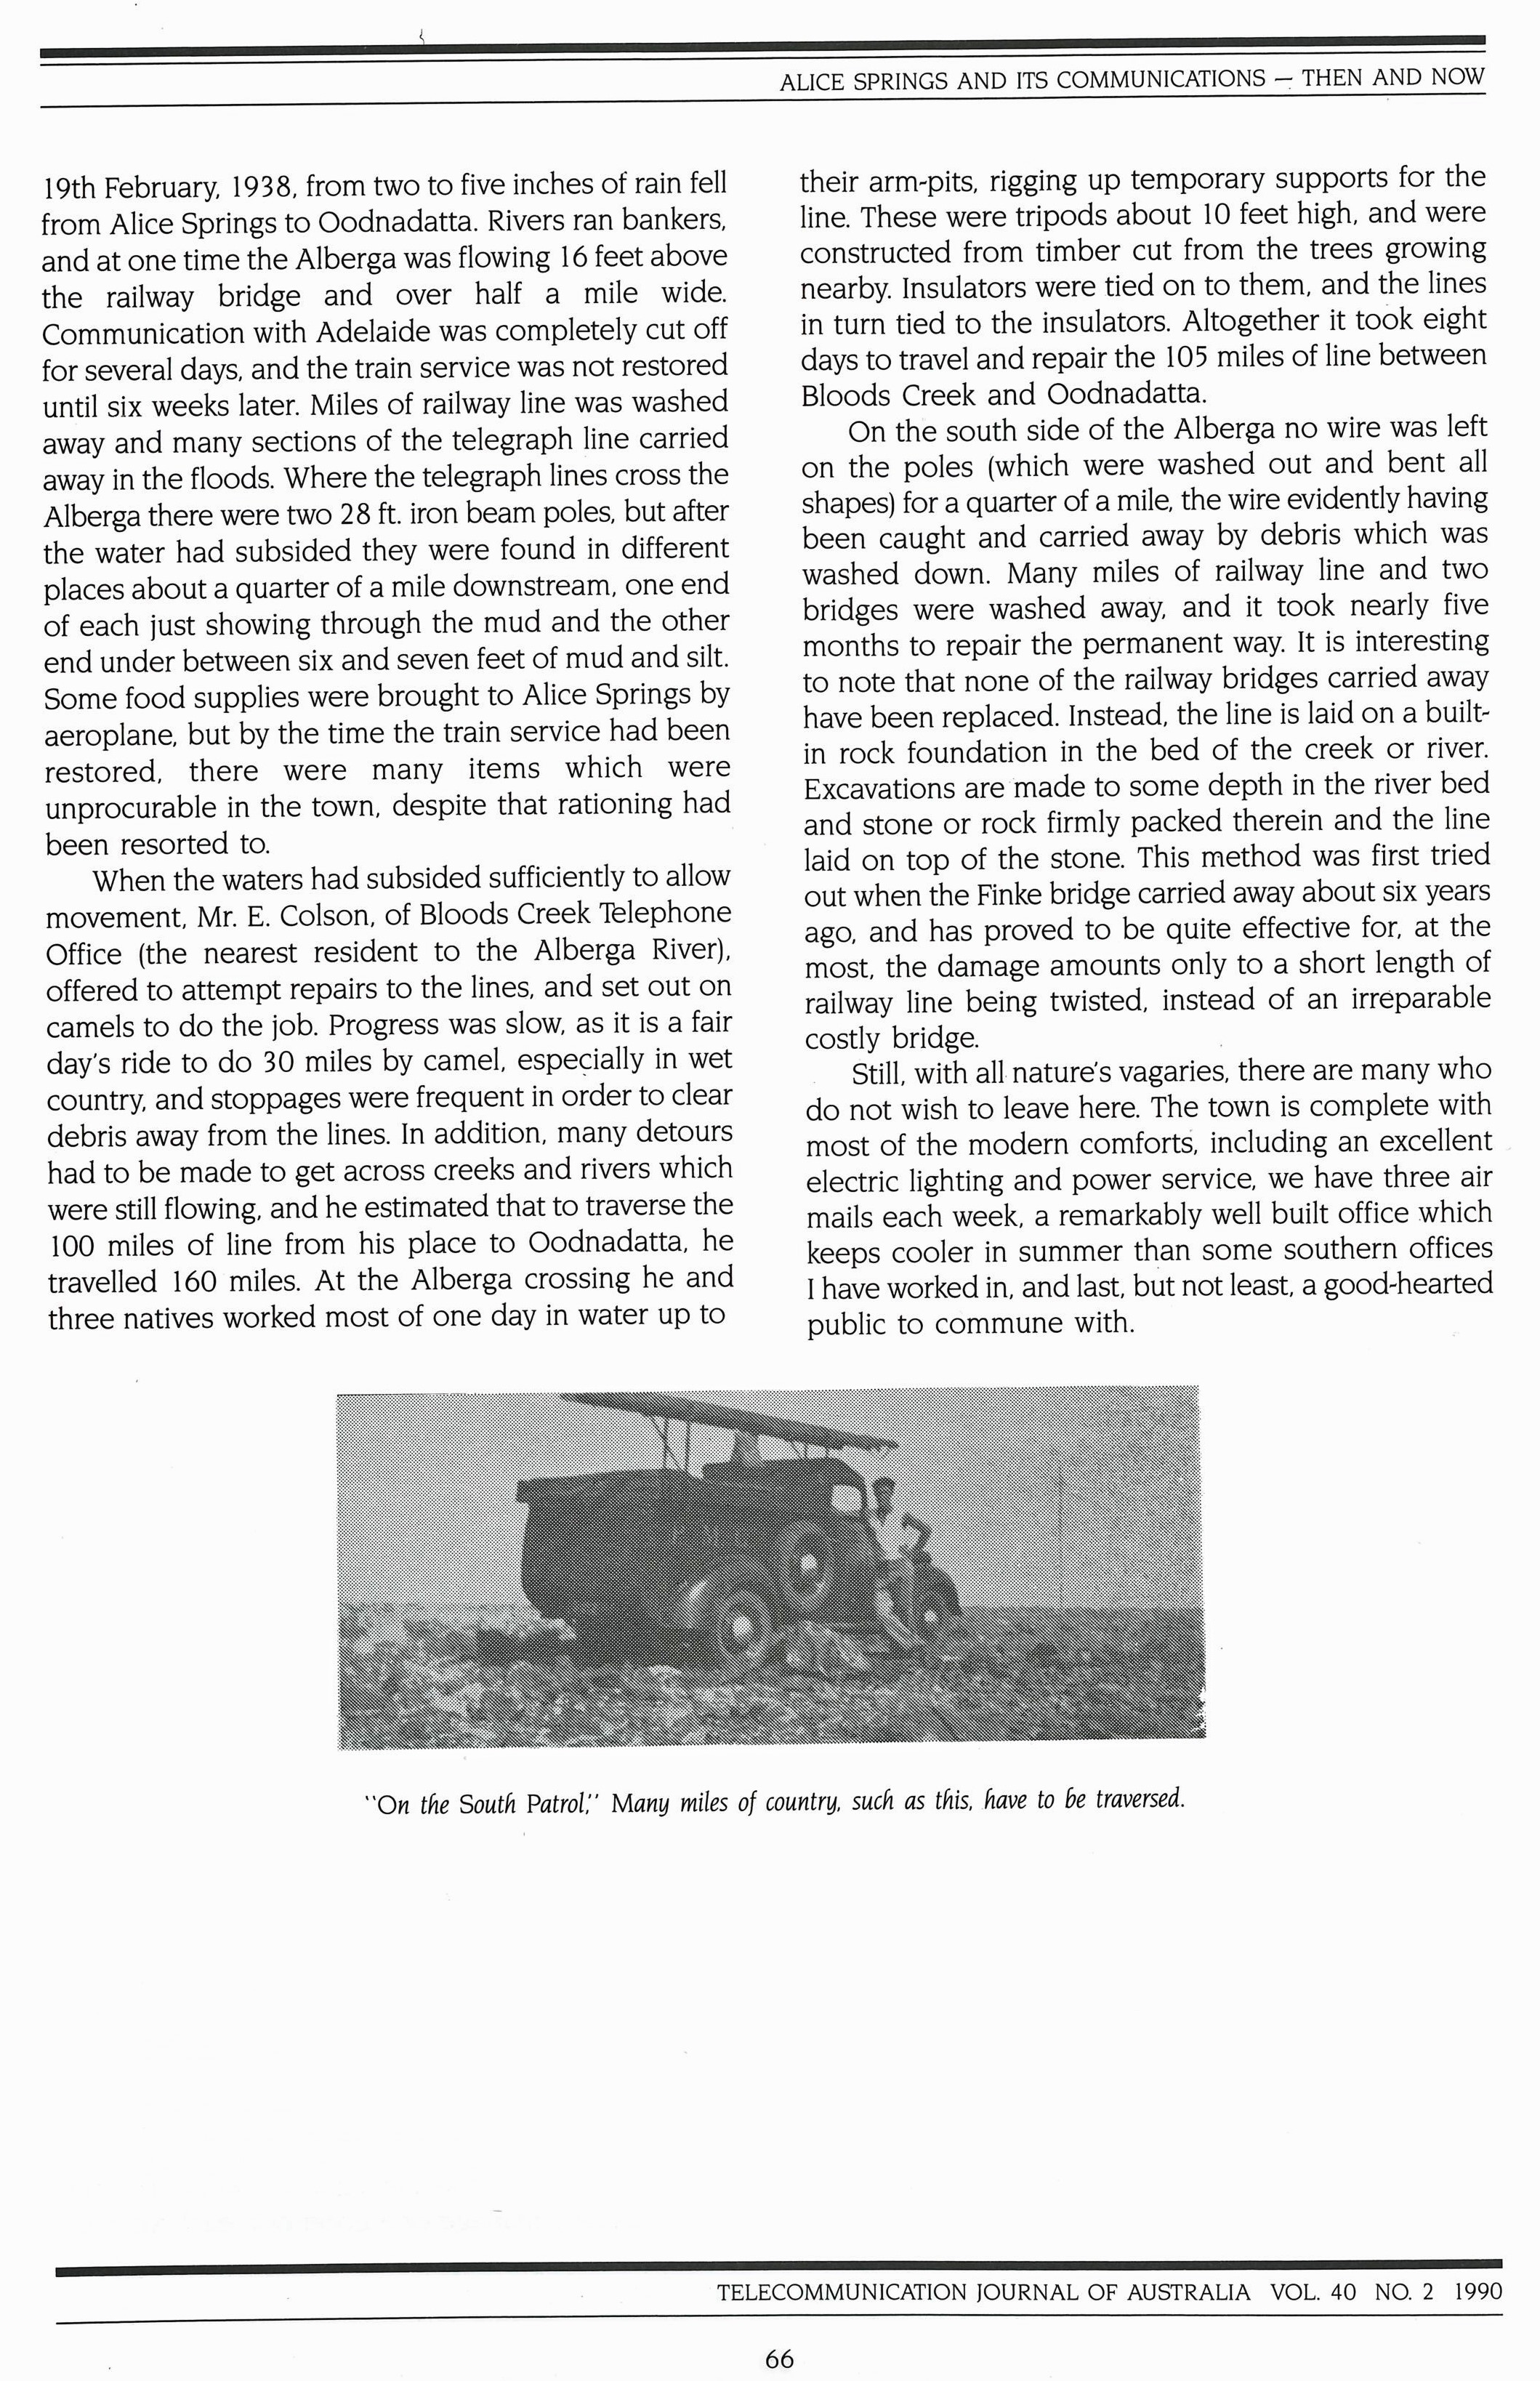 Page 5 of 1990 historical paper